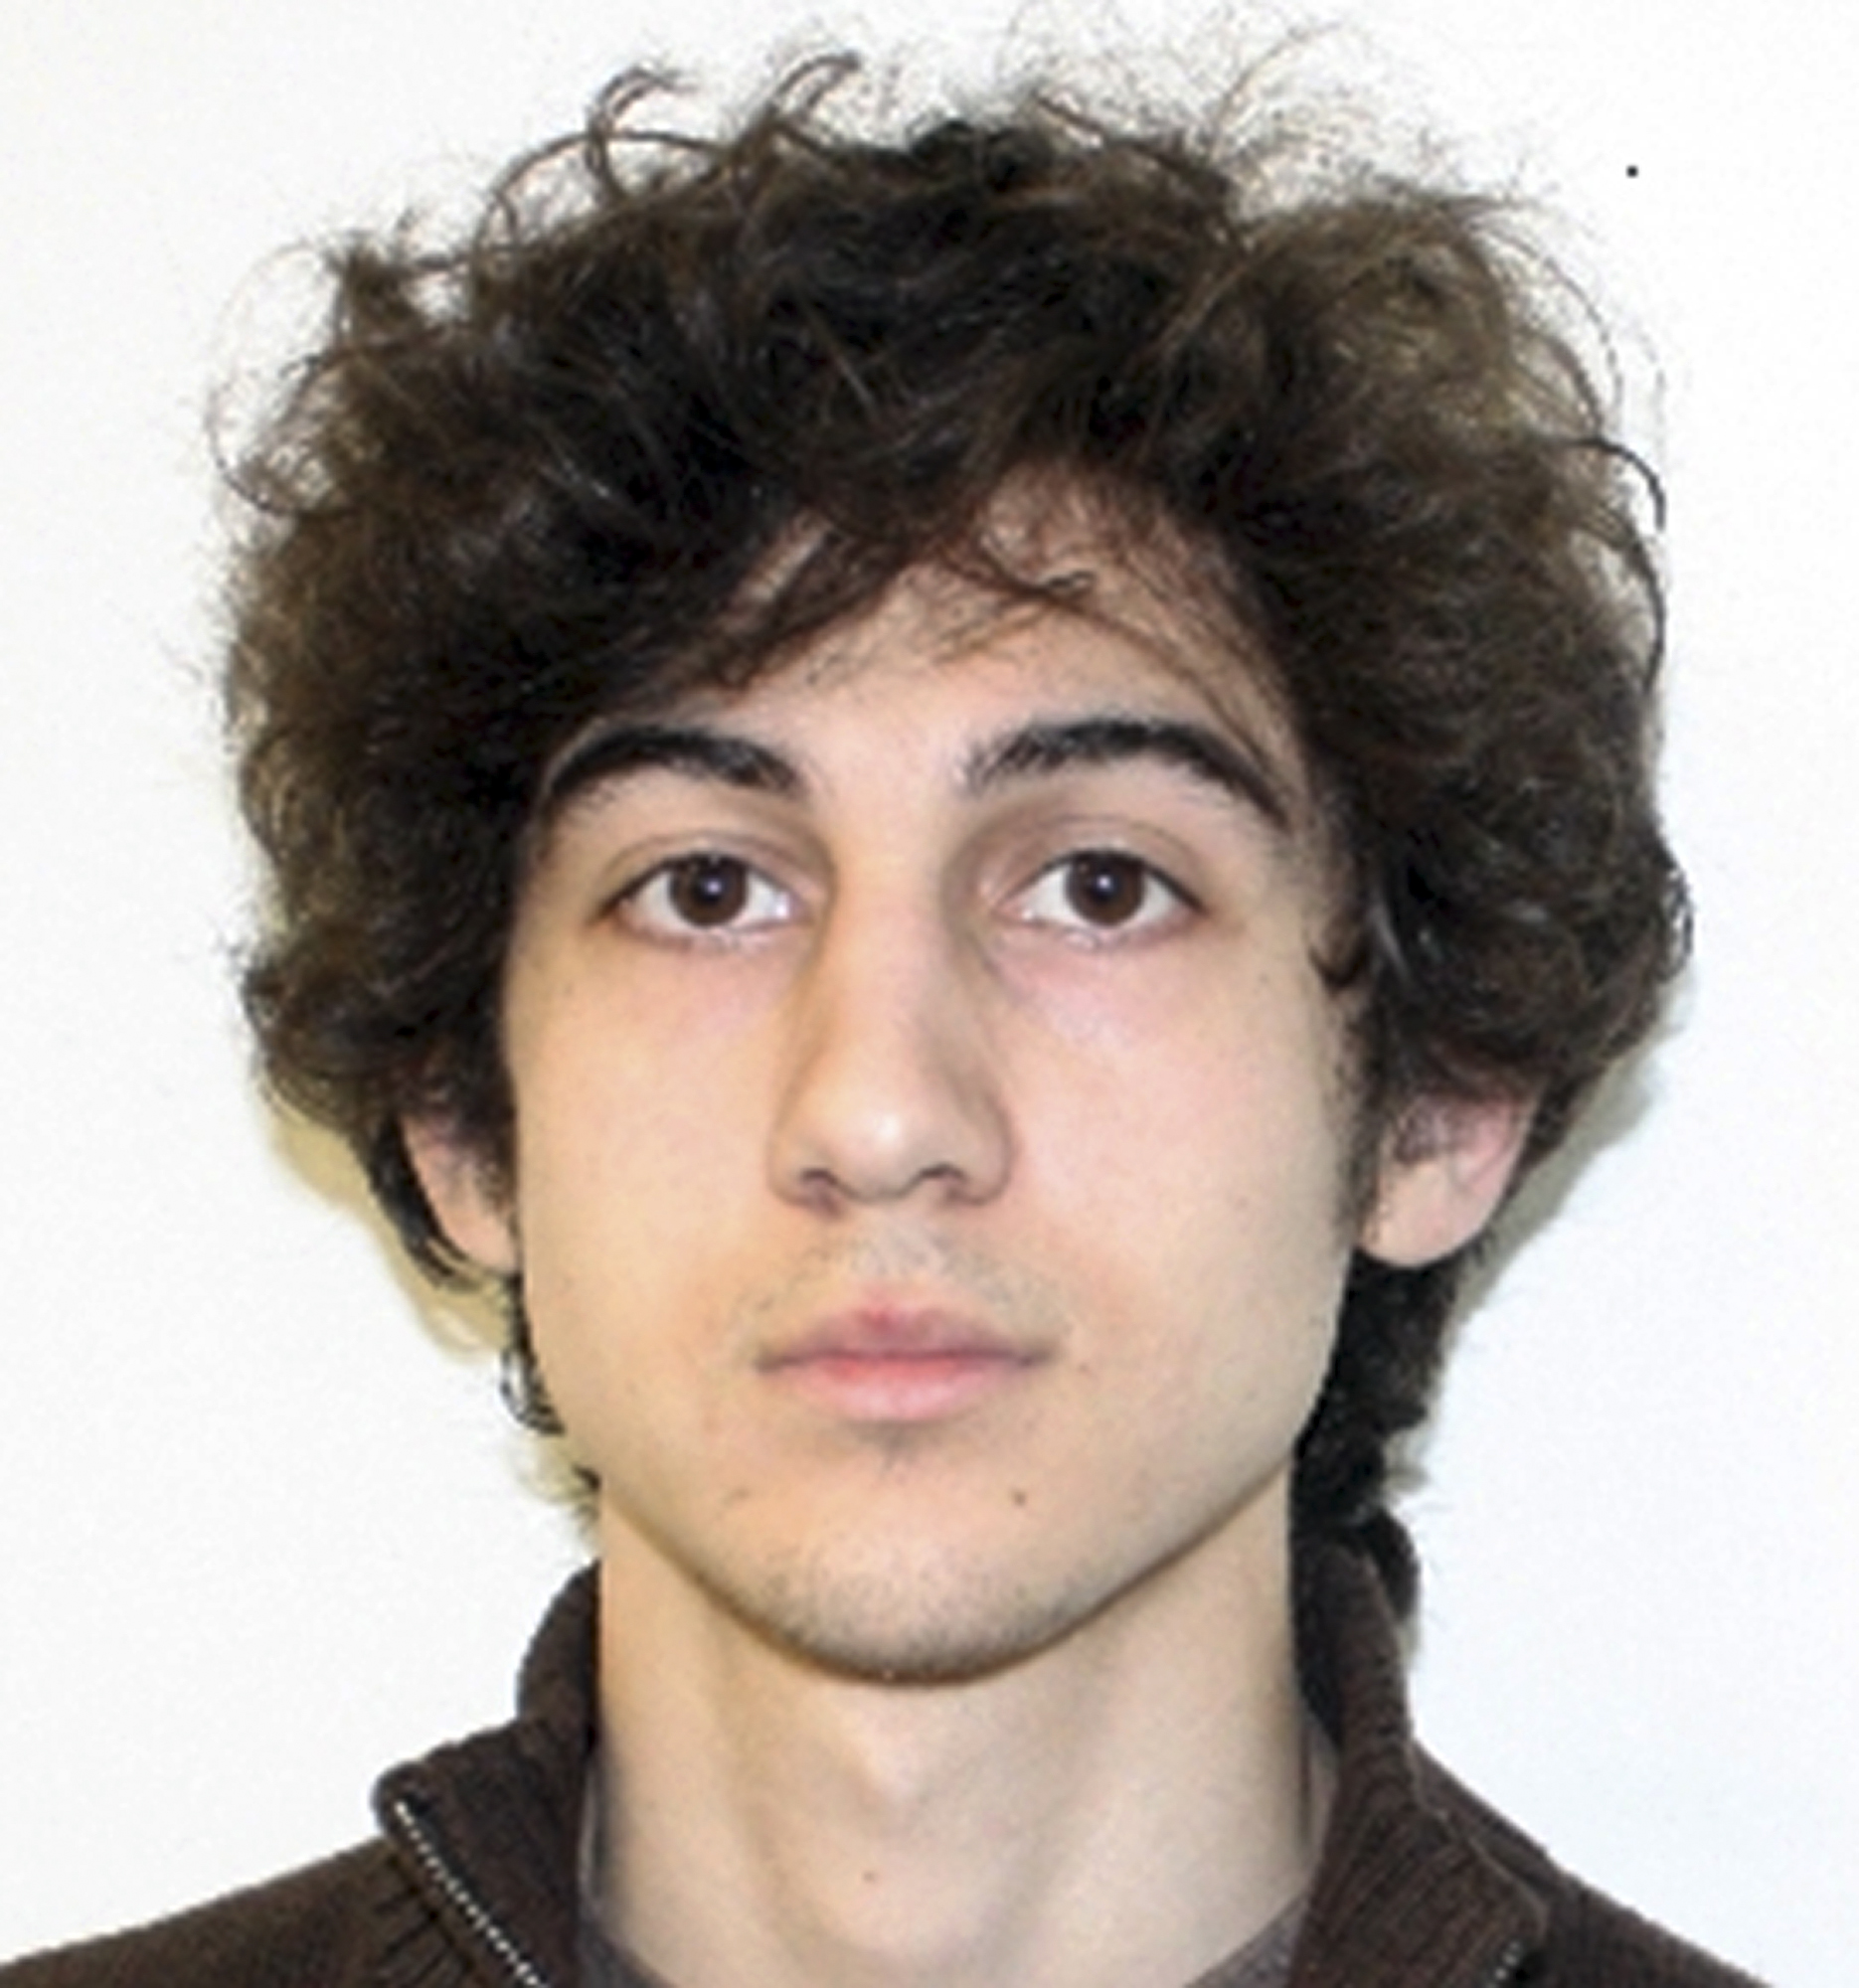 PHOTO: Dzhokhar Tsarnaev, a suspect in the Boston Marathon bombings, is expected to be indicted on June 27, 2013.